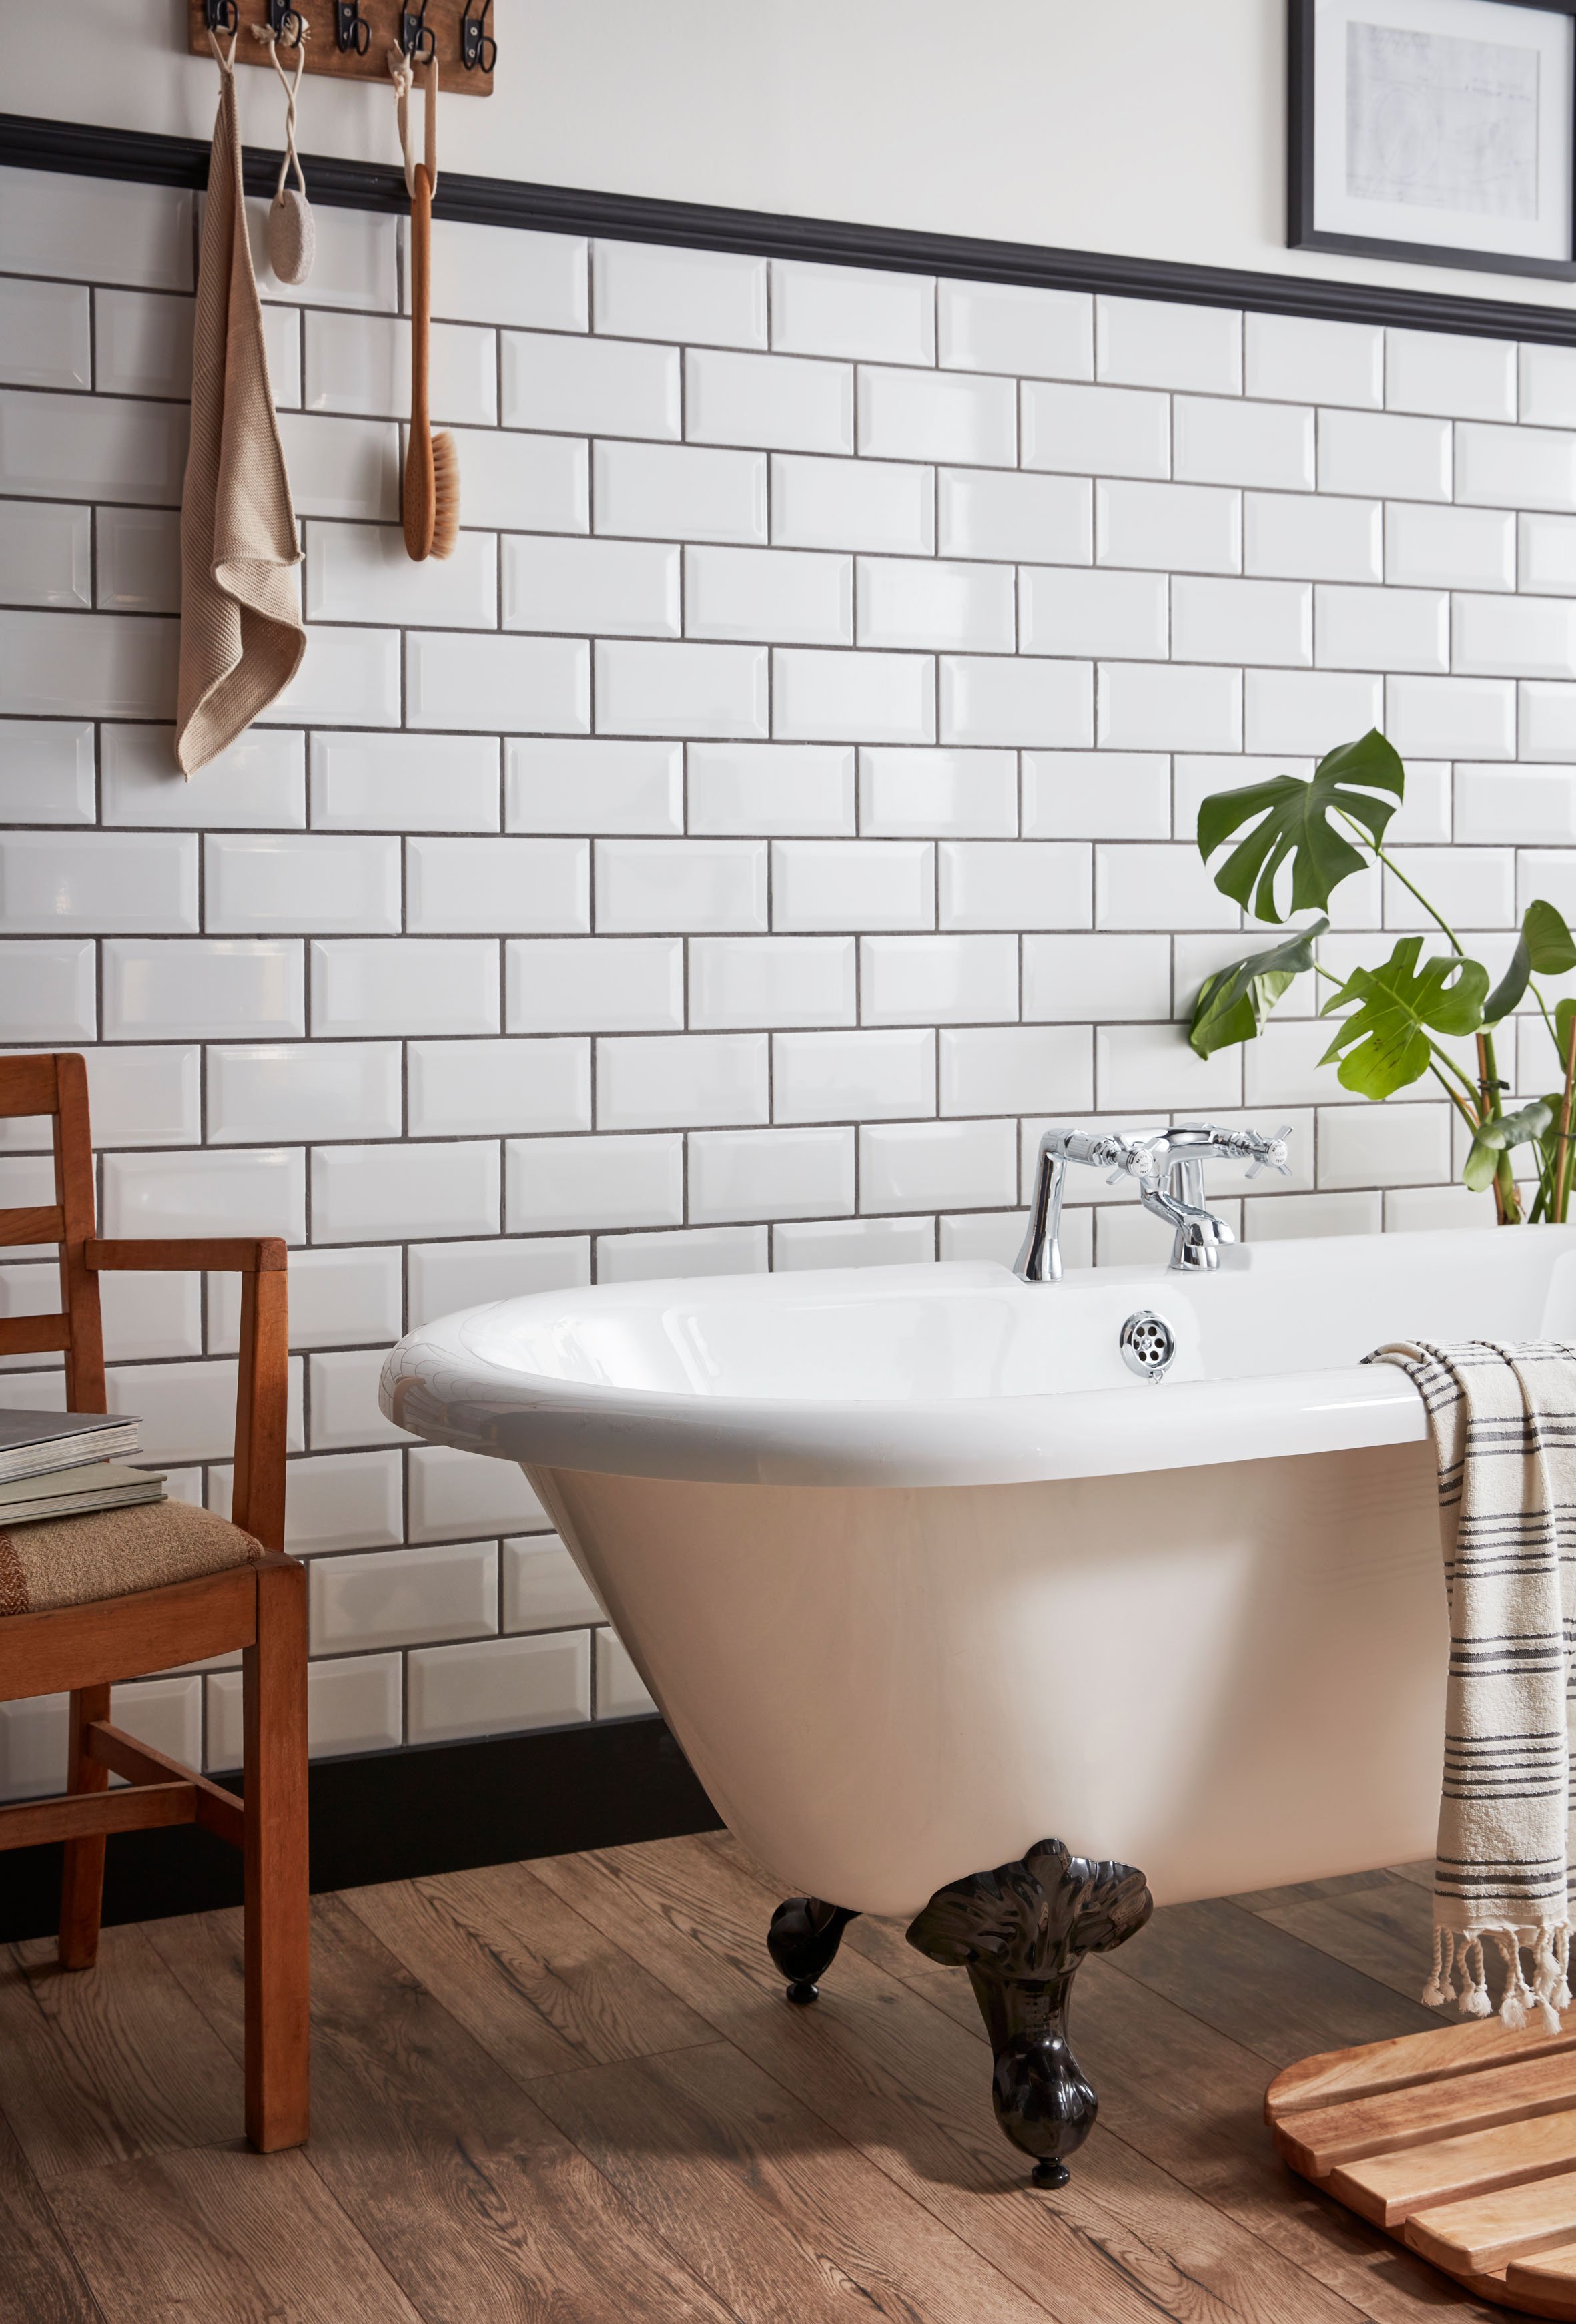 an image of a freestanding bath in a white tiled bathroom